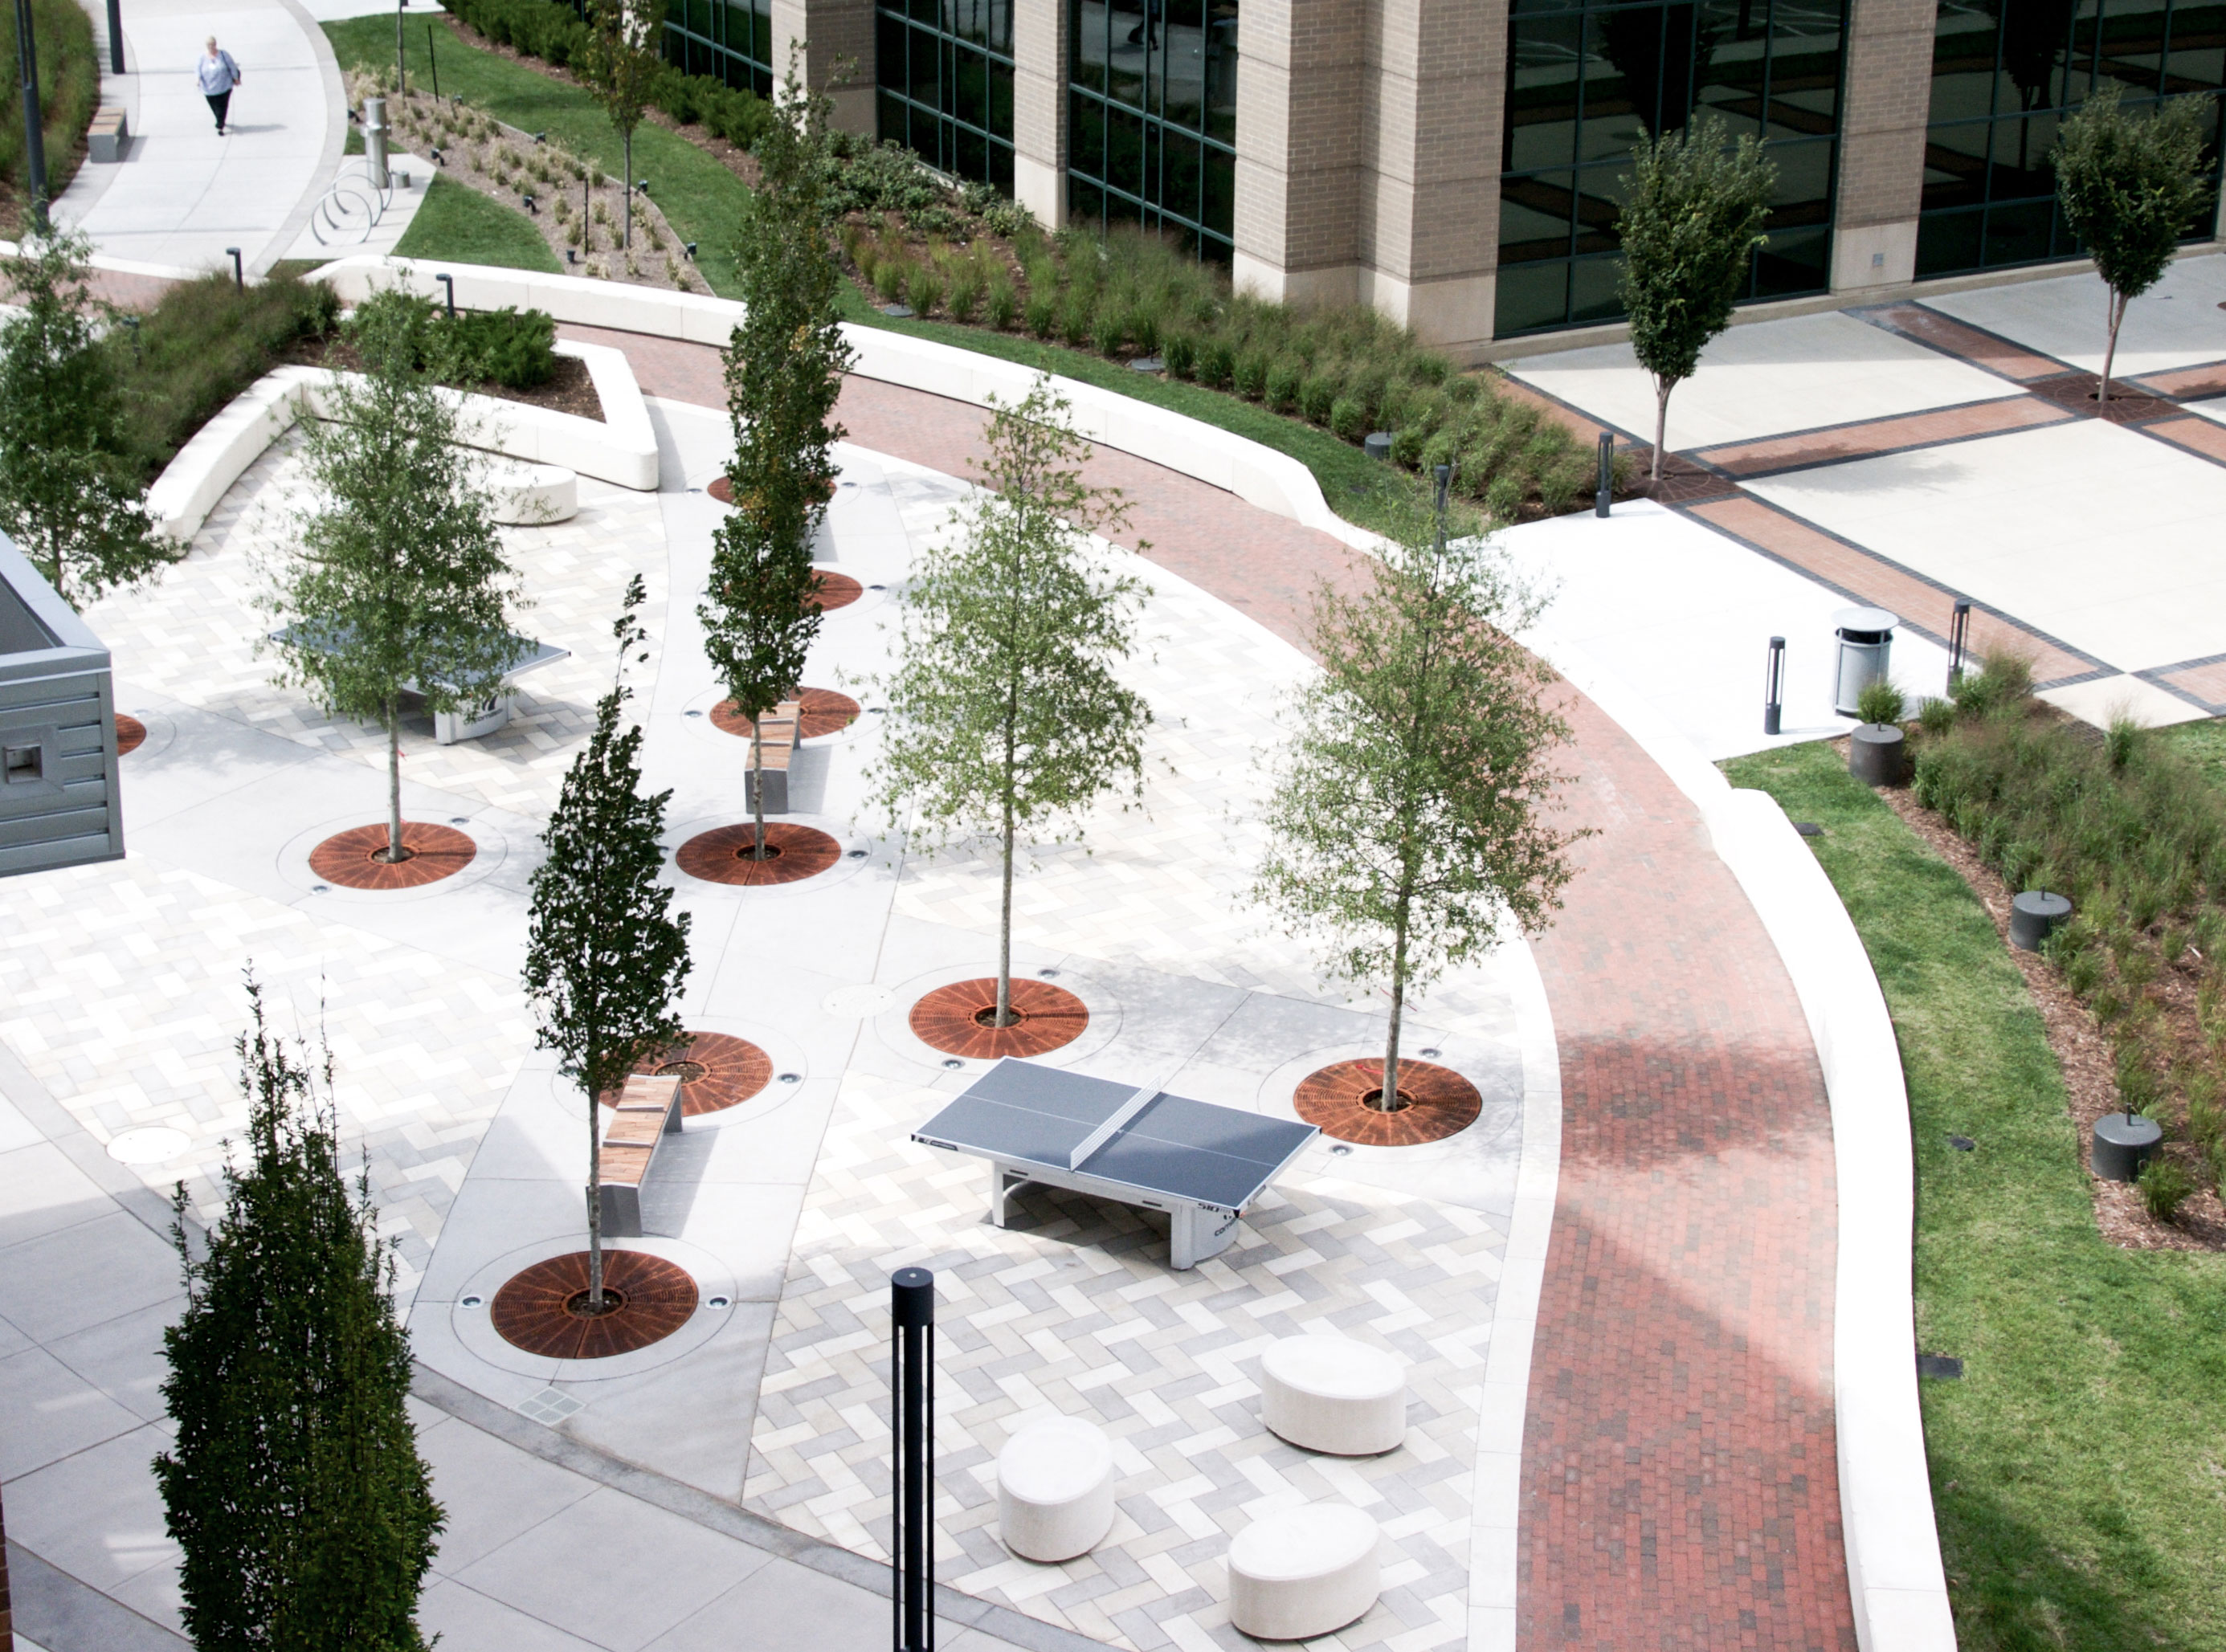 Commercial Pavers create a great social space on the campus at Louisville University